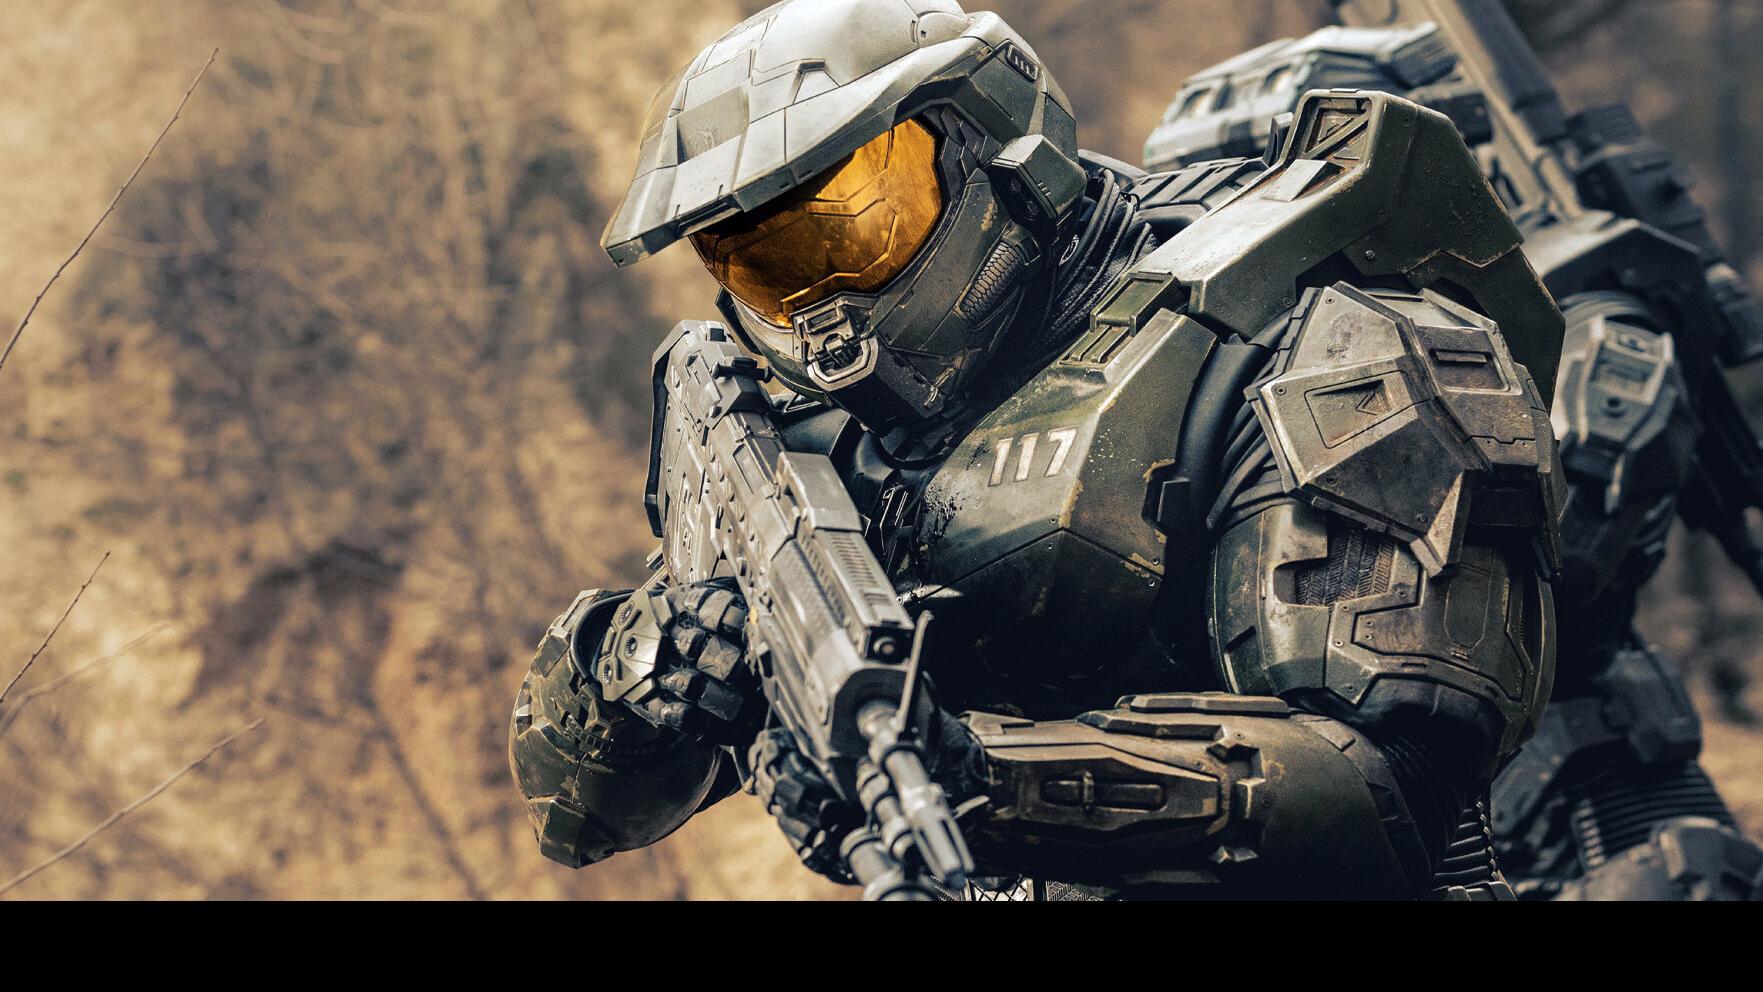 Things The Halo Show Has Changed About Master Chief